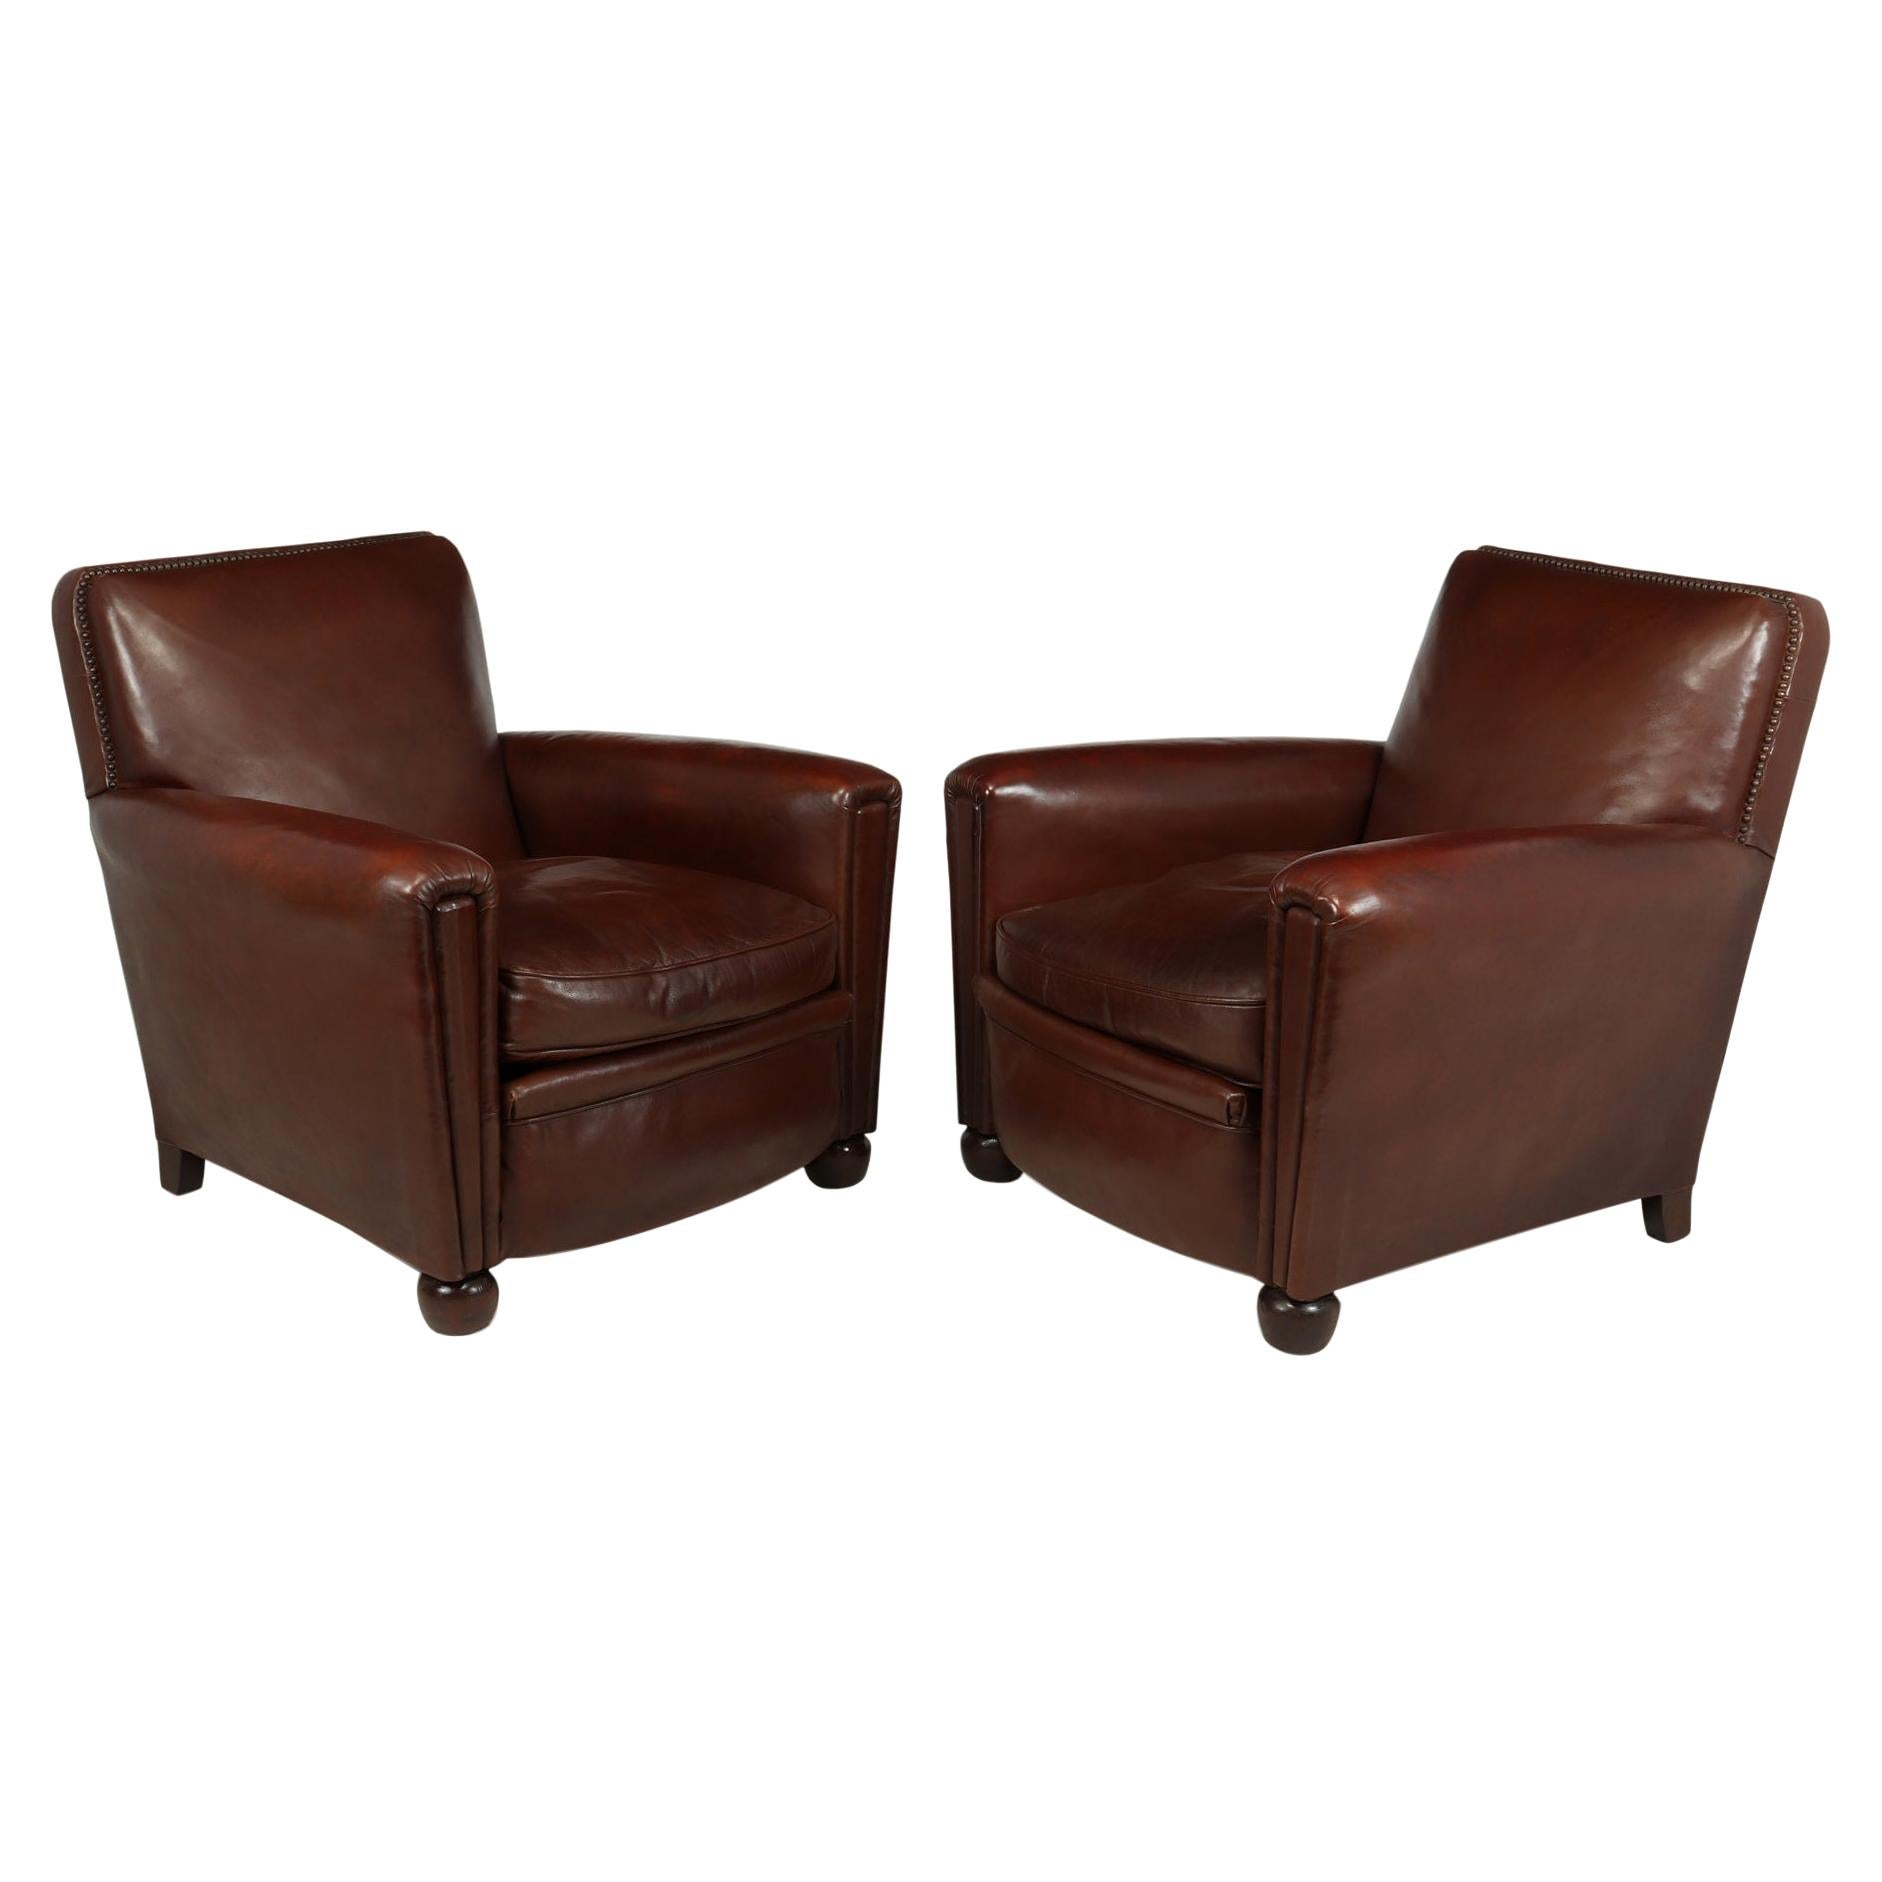 Pair of French Leather Club Chairs, c1940